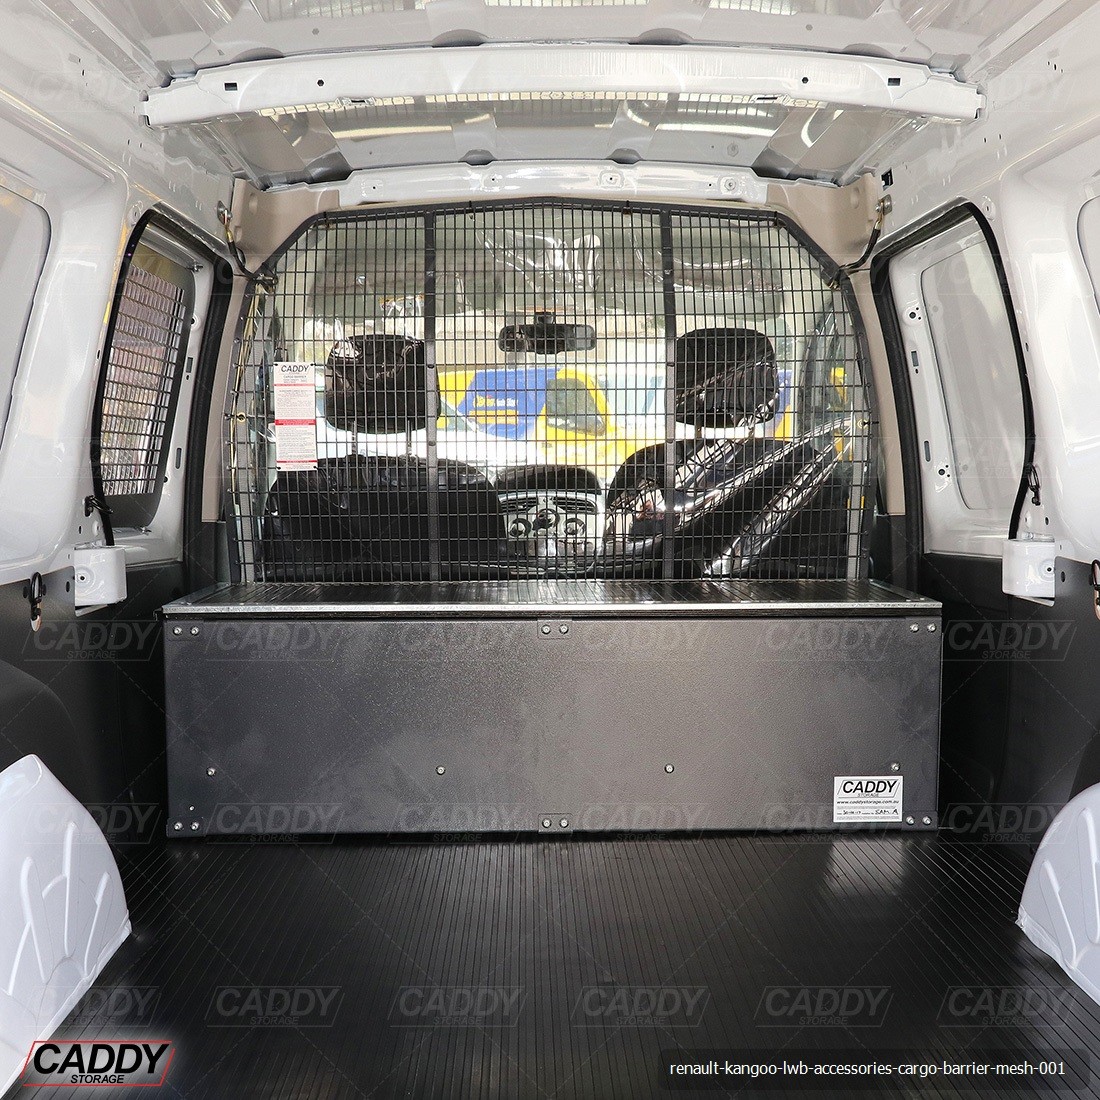 Renault / LWB Front Mesh Cargo - Caddy Storage Systems